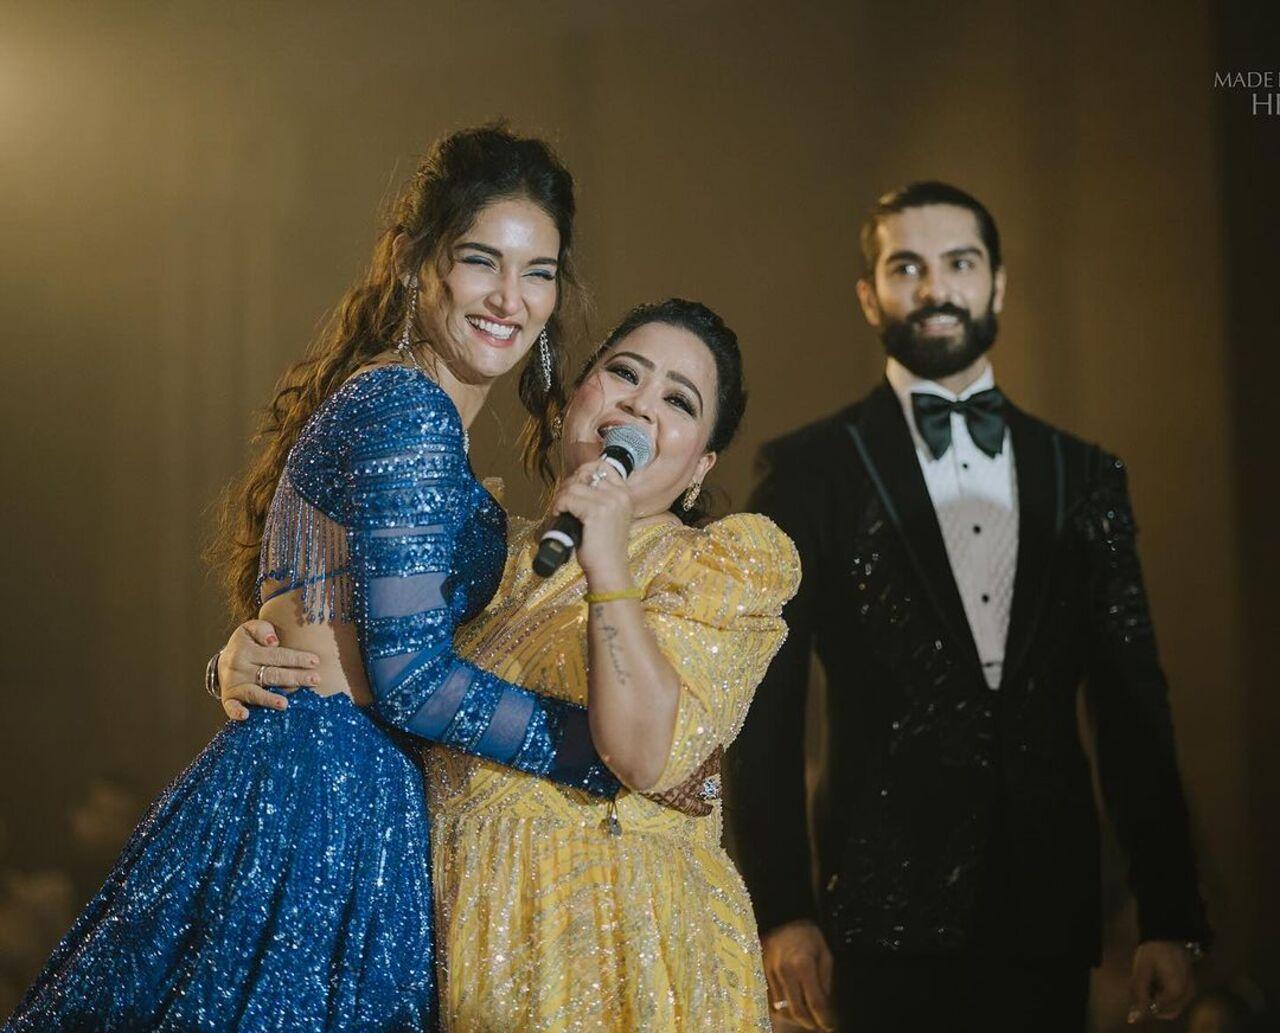 Bharti Singh was also among the guests at the wedding and seems to be doing what she does best by cracking up the couple and the other guests